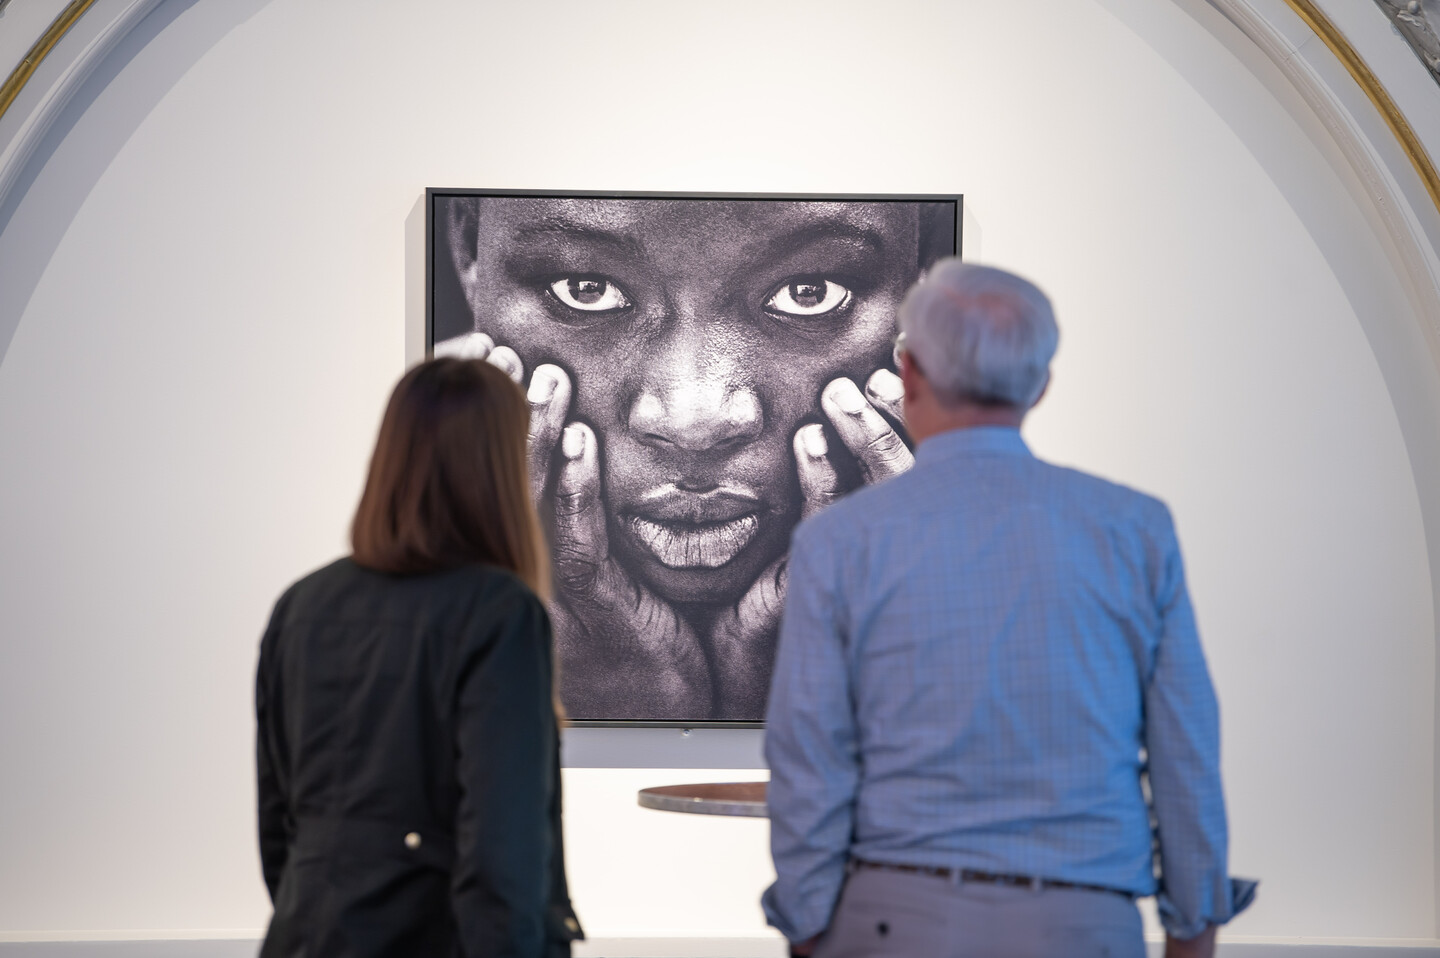 Two museum visitors are viewing an artwork. The artwork is a black-and-white close-up portrait of a woman's face. She has a dark skin tone and is holding her face in her hands.